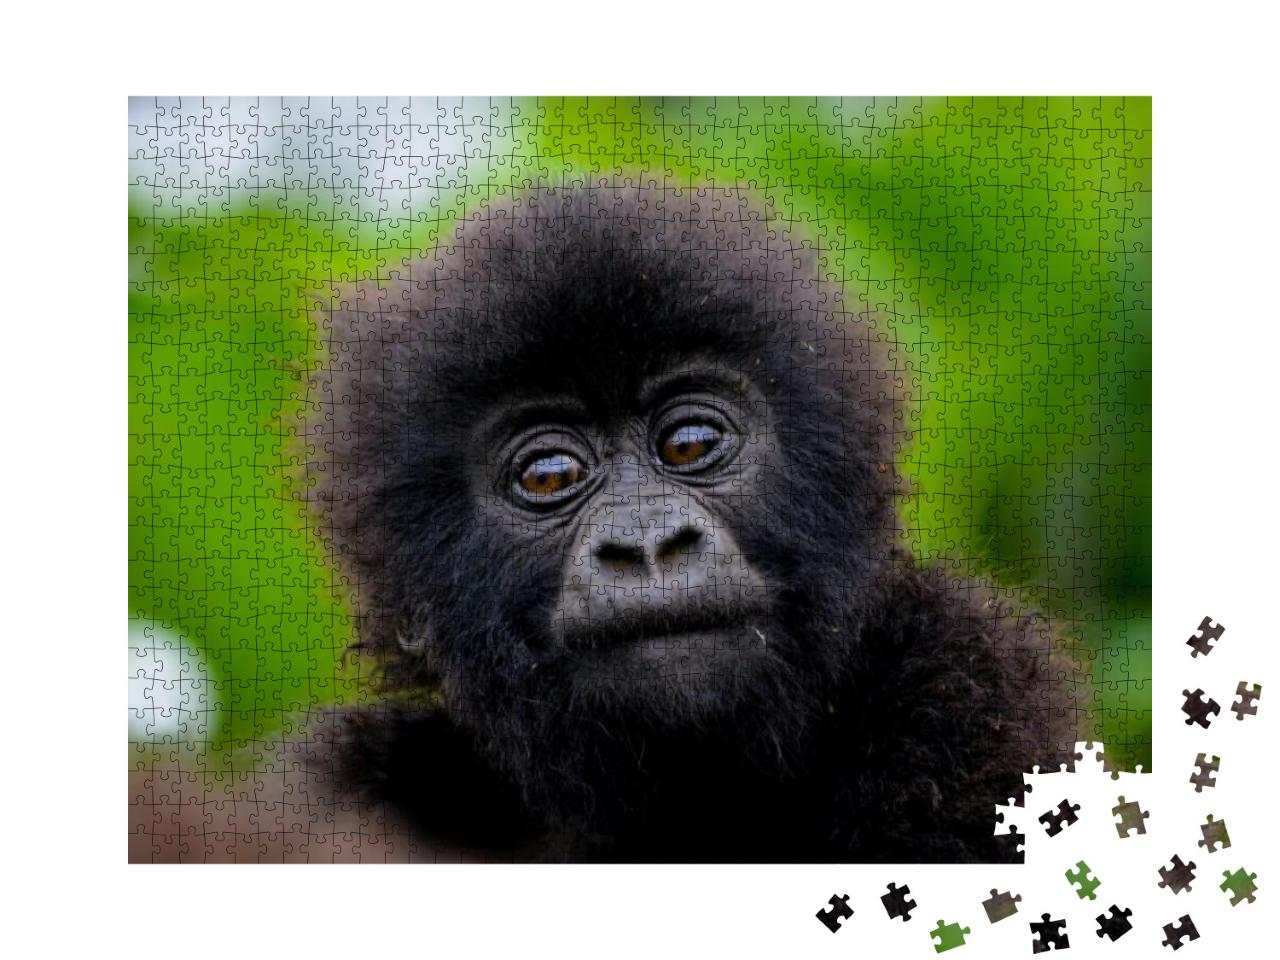 Cute Baby Gorilla in the Rwanda Forest... Jigsaw Puzzle with 1000 pieces